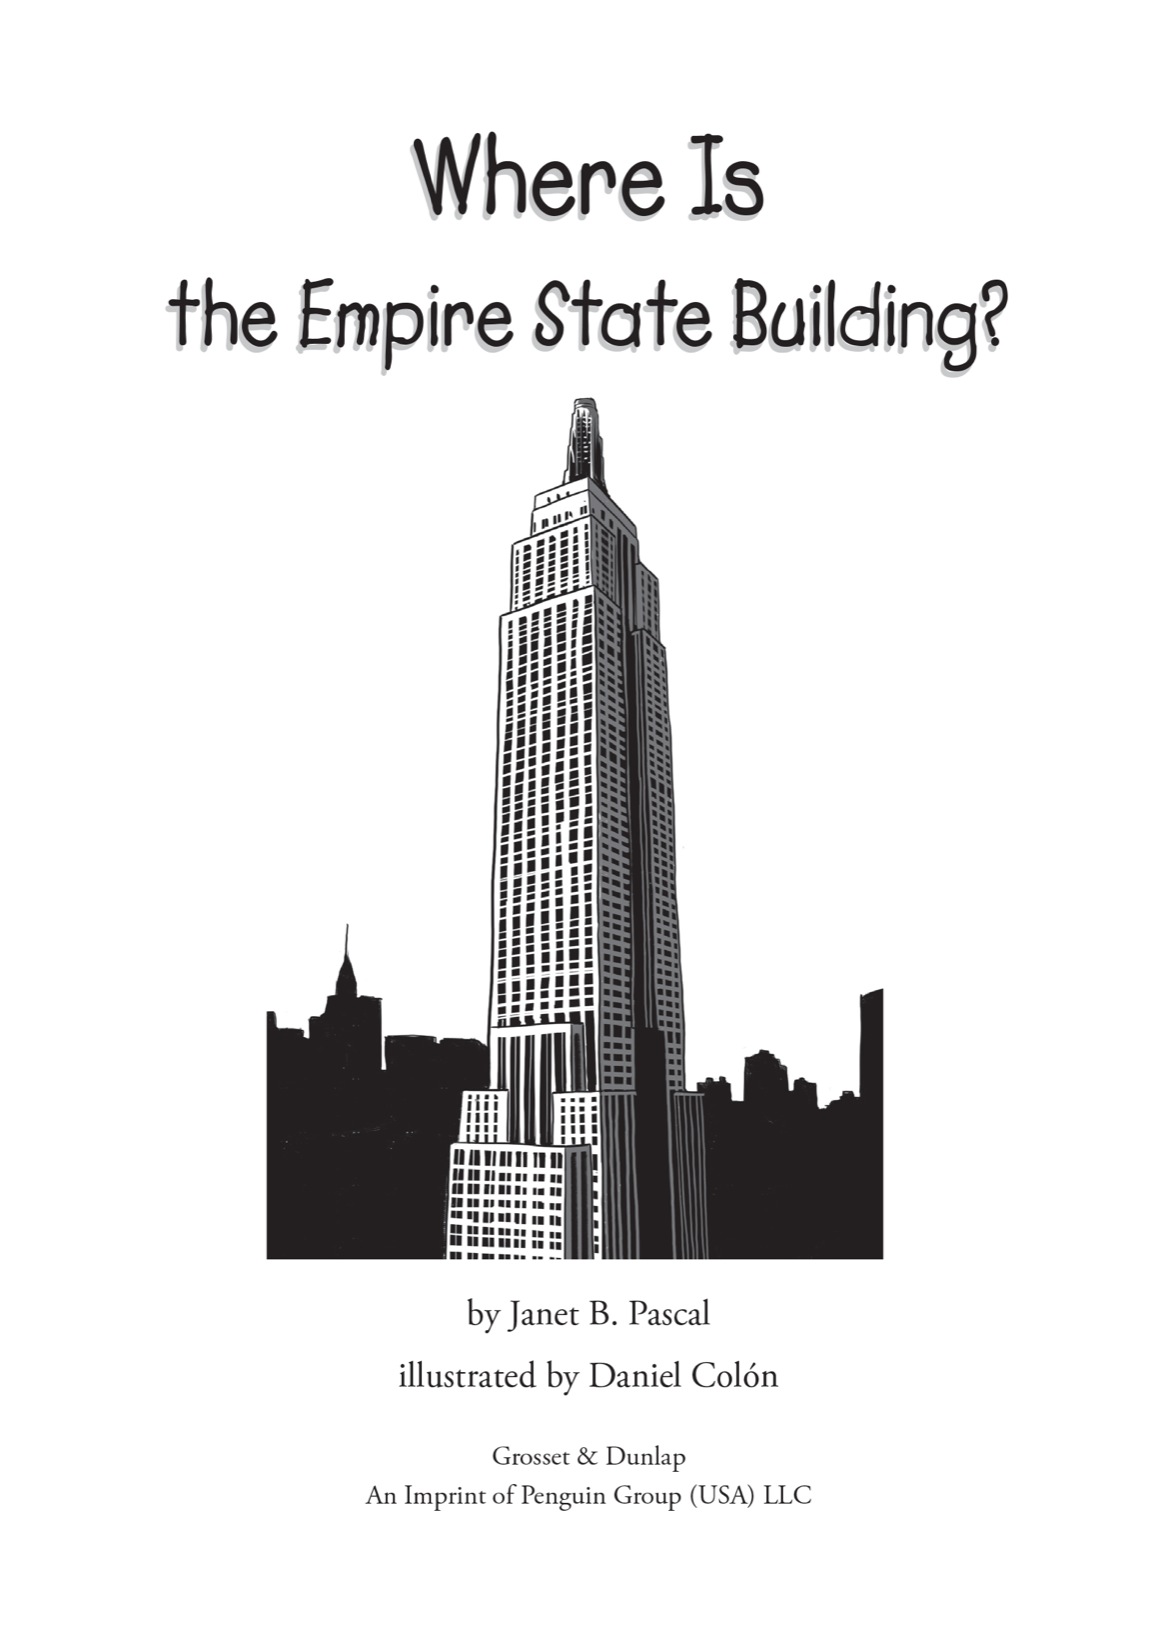 Where Is the Empire State Building - image 2